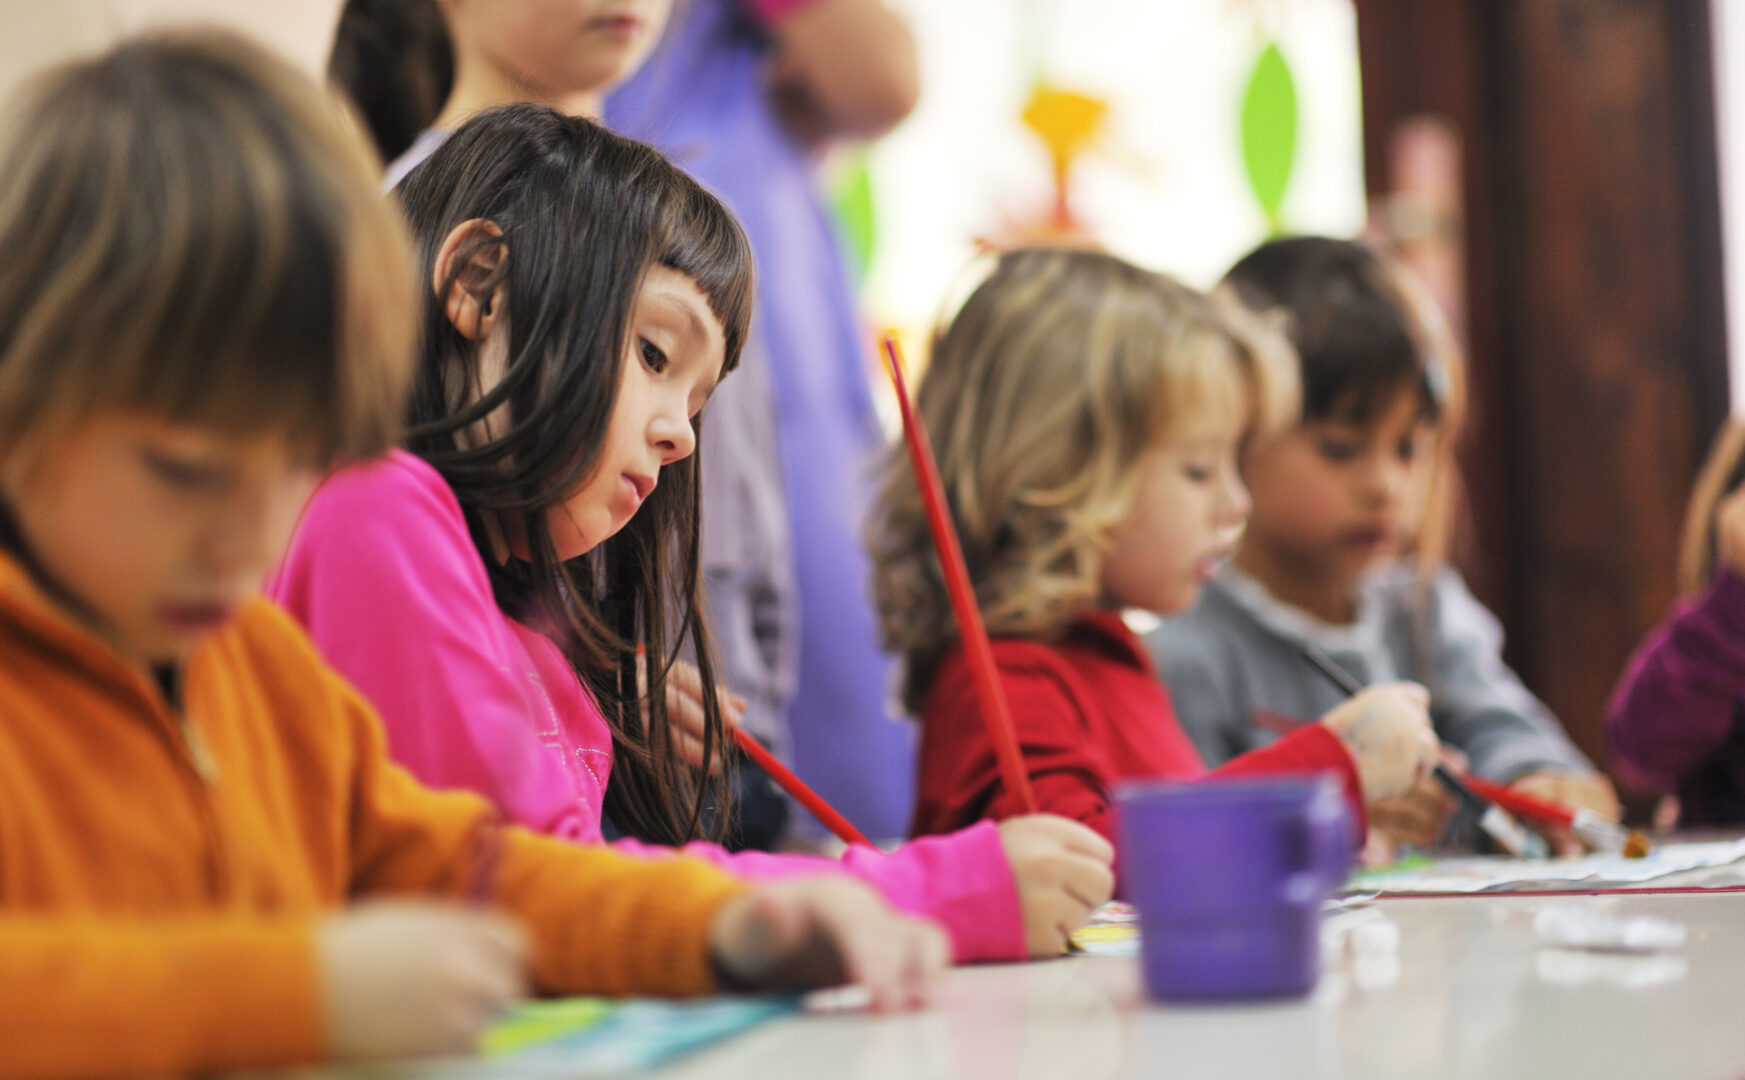 Three preschool age children creat art at a white table. From left ro right: young girl with long dark hair and bangs, young child with wavy blonde hair, and a young boy with short dark hair